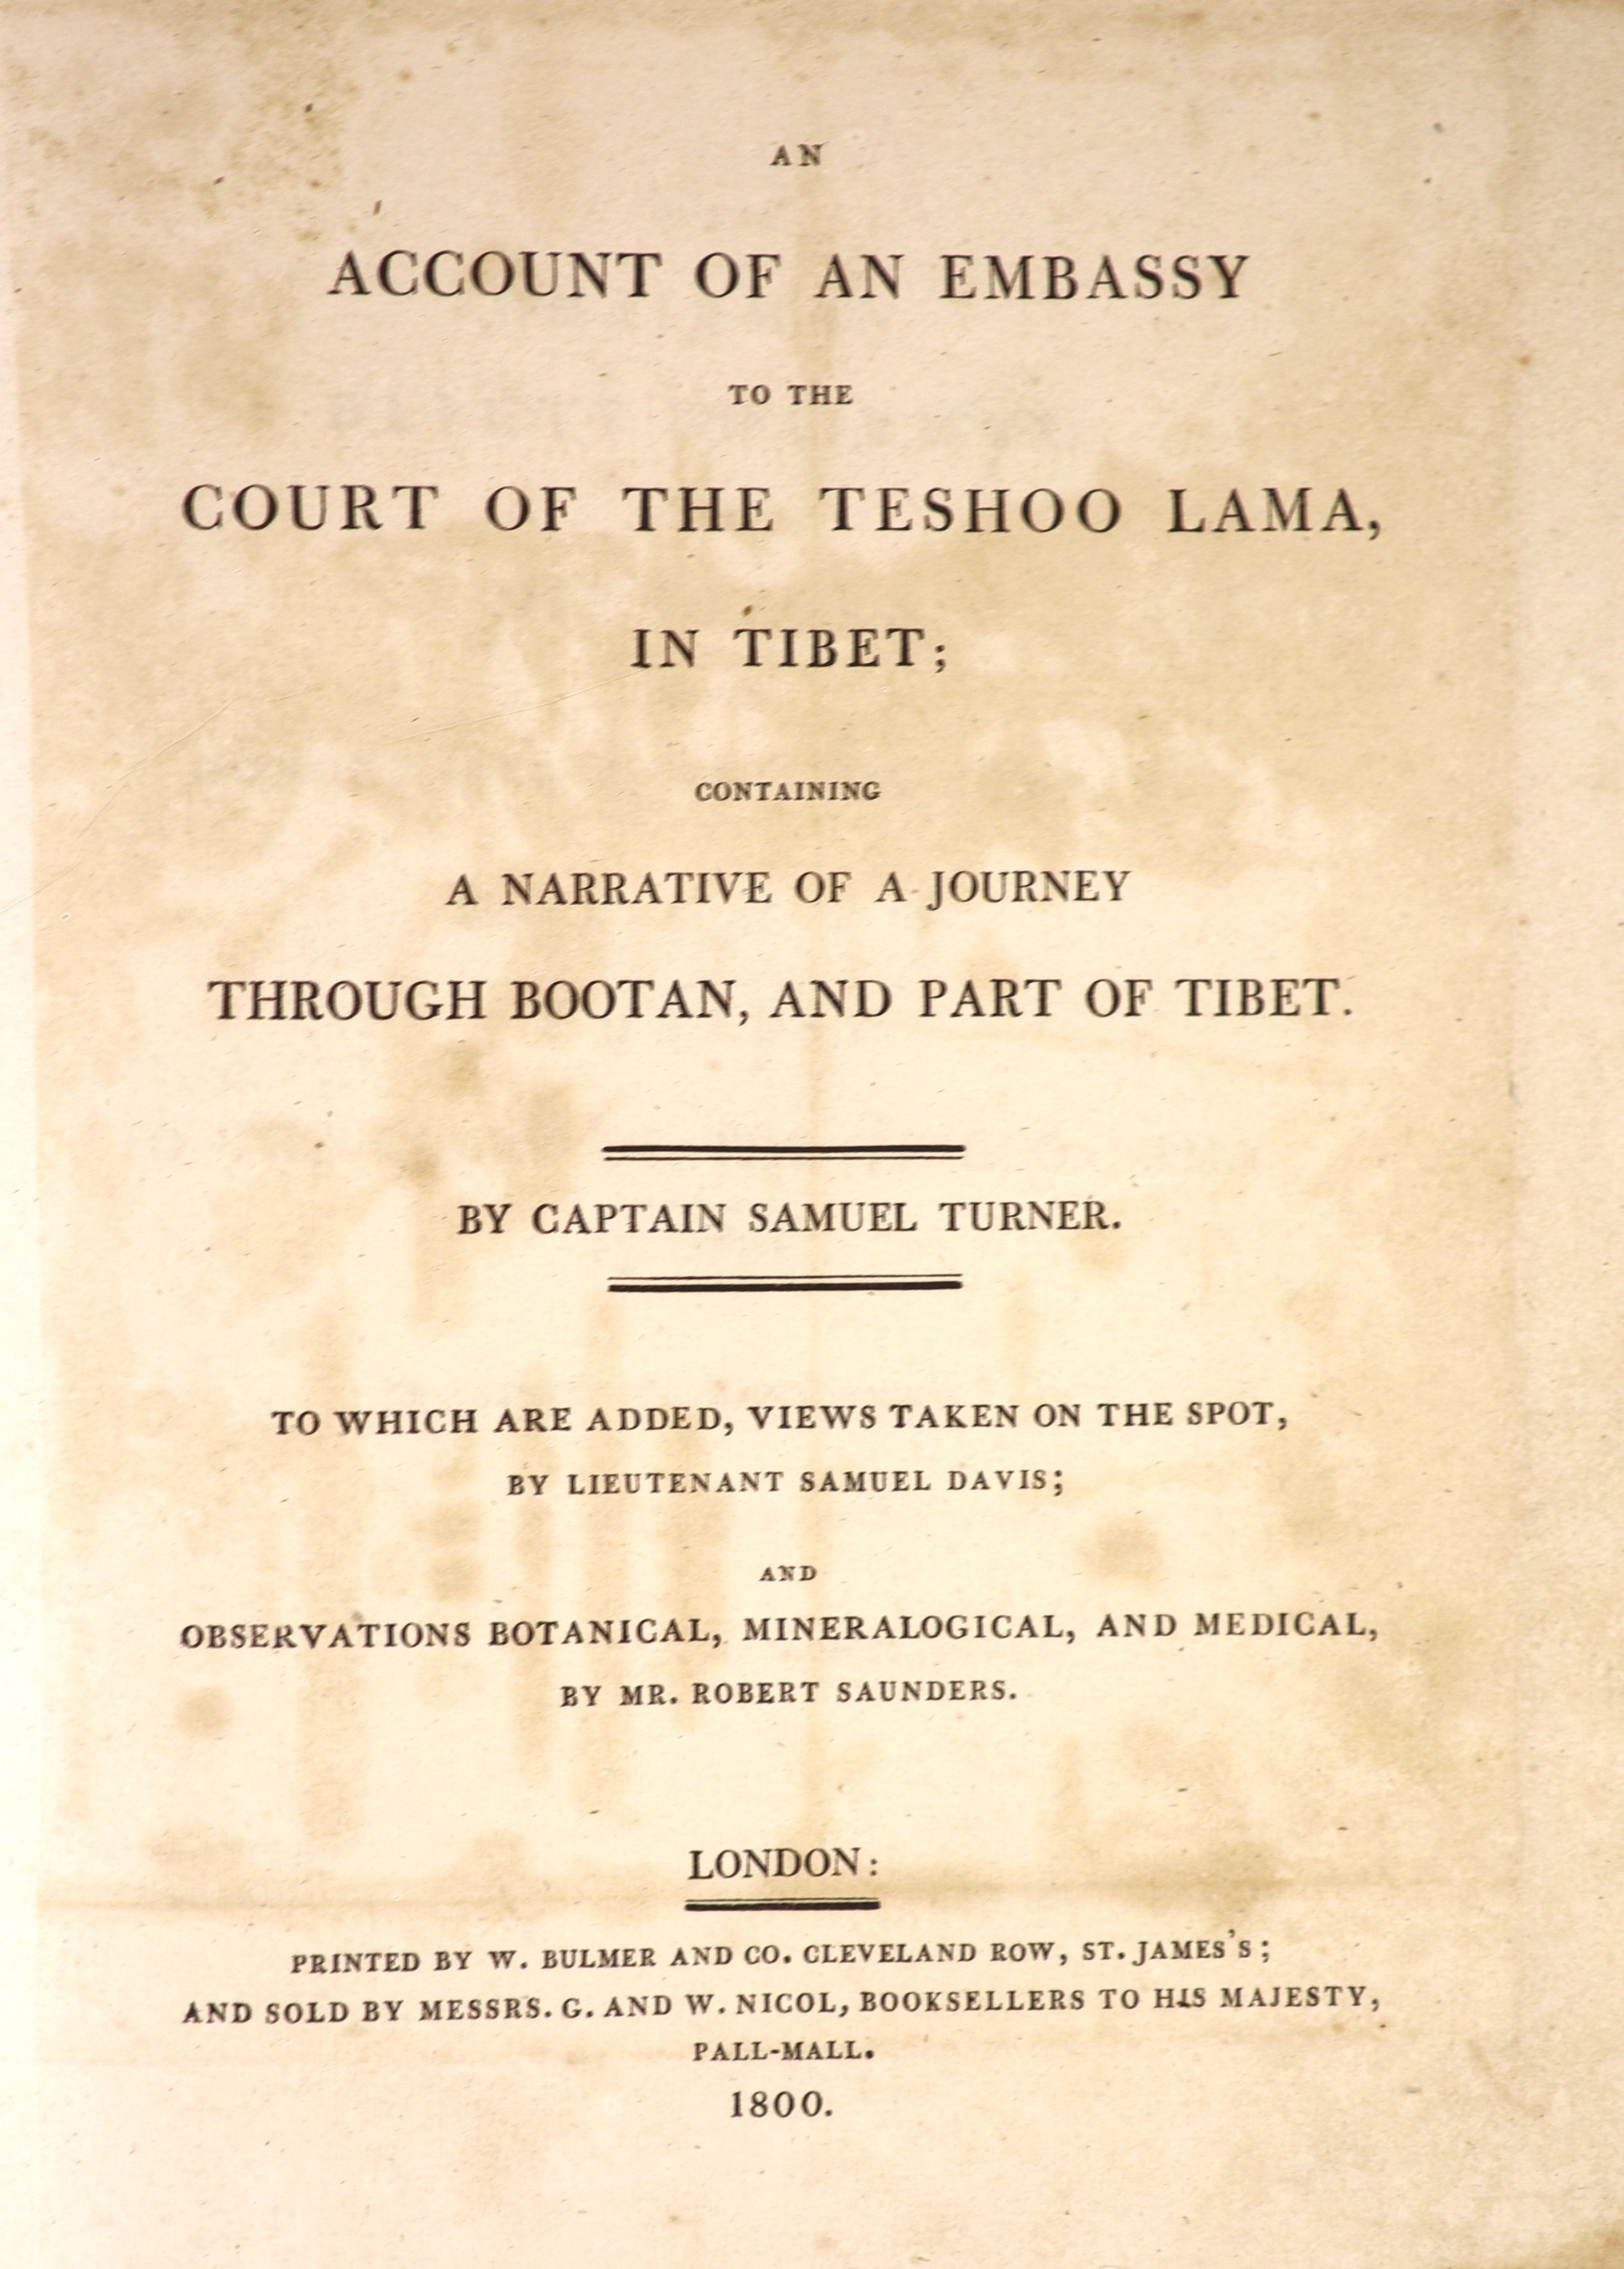 Turner, Capt. Samuel - An Account of an Embassy to the Court of the Teshoo Lama, in Tibet; containing a Narrative of a Journey through Bootan, and part of Tibet. engraved